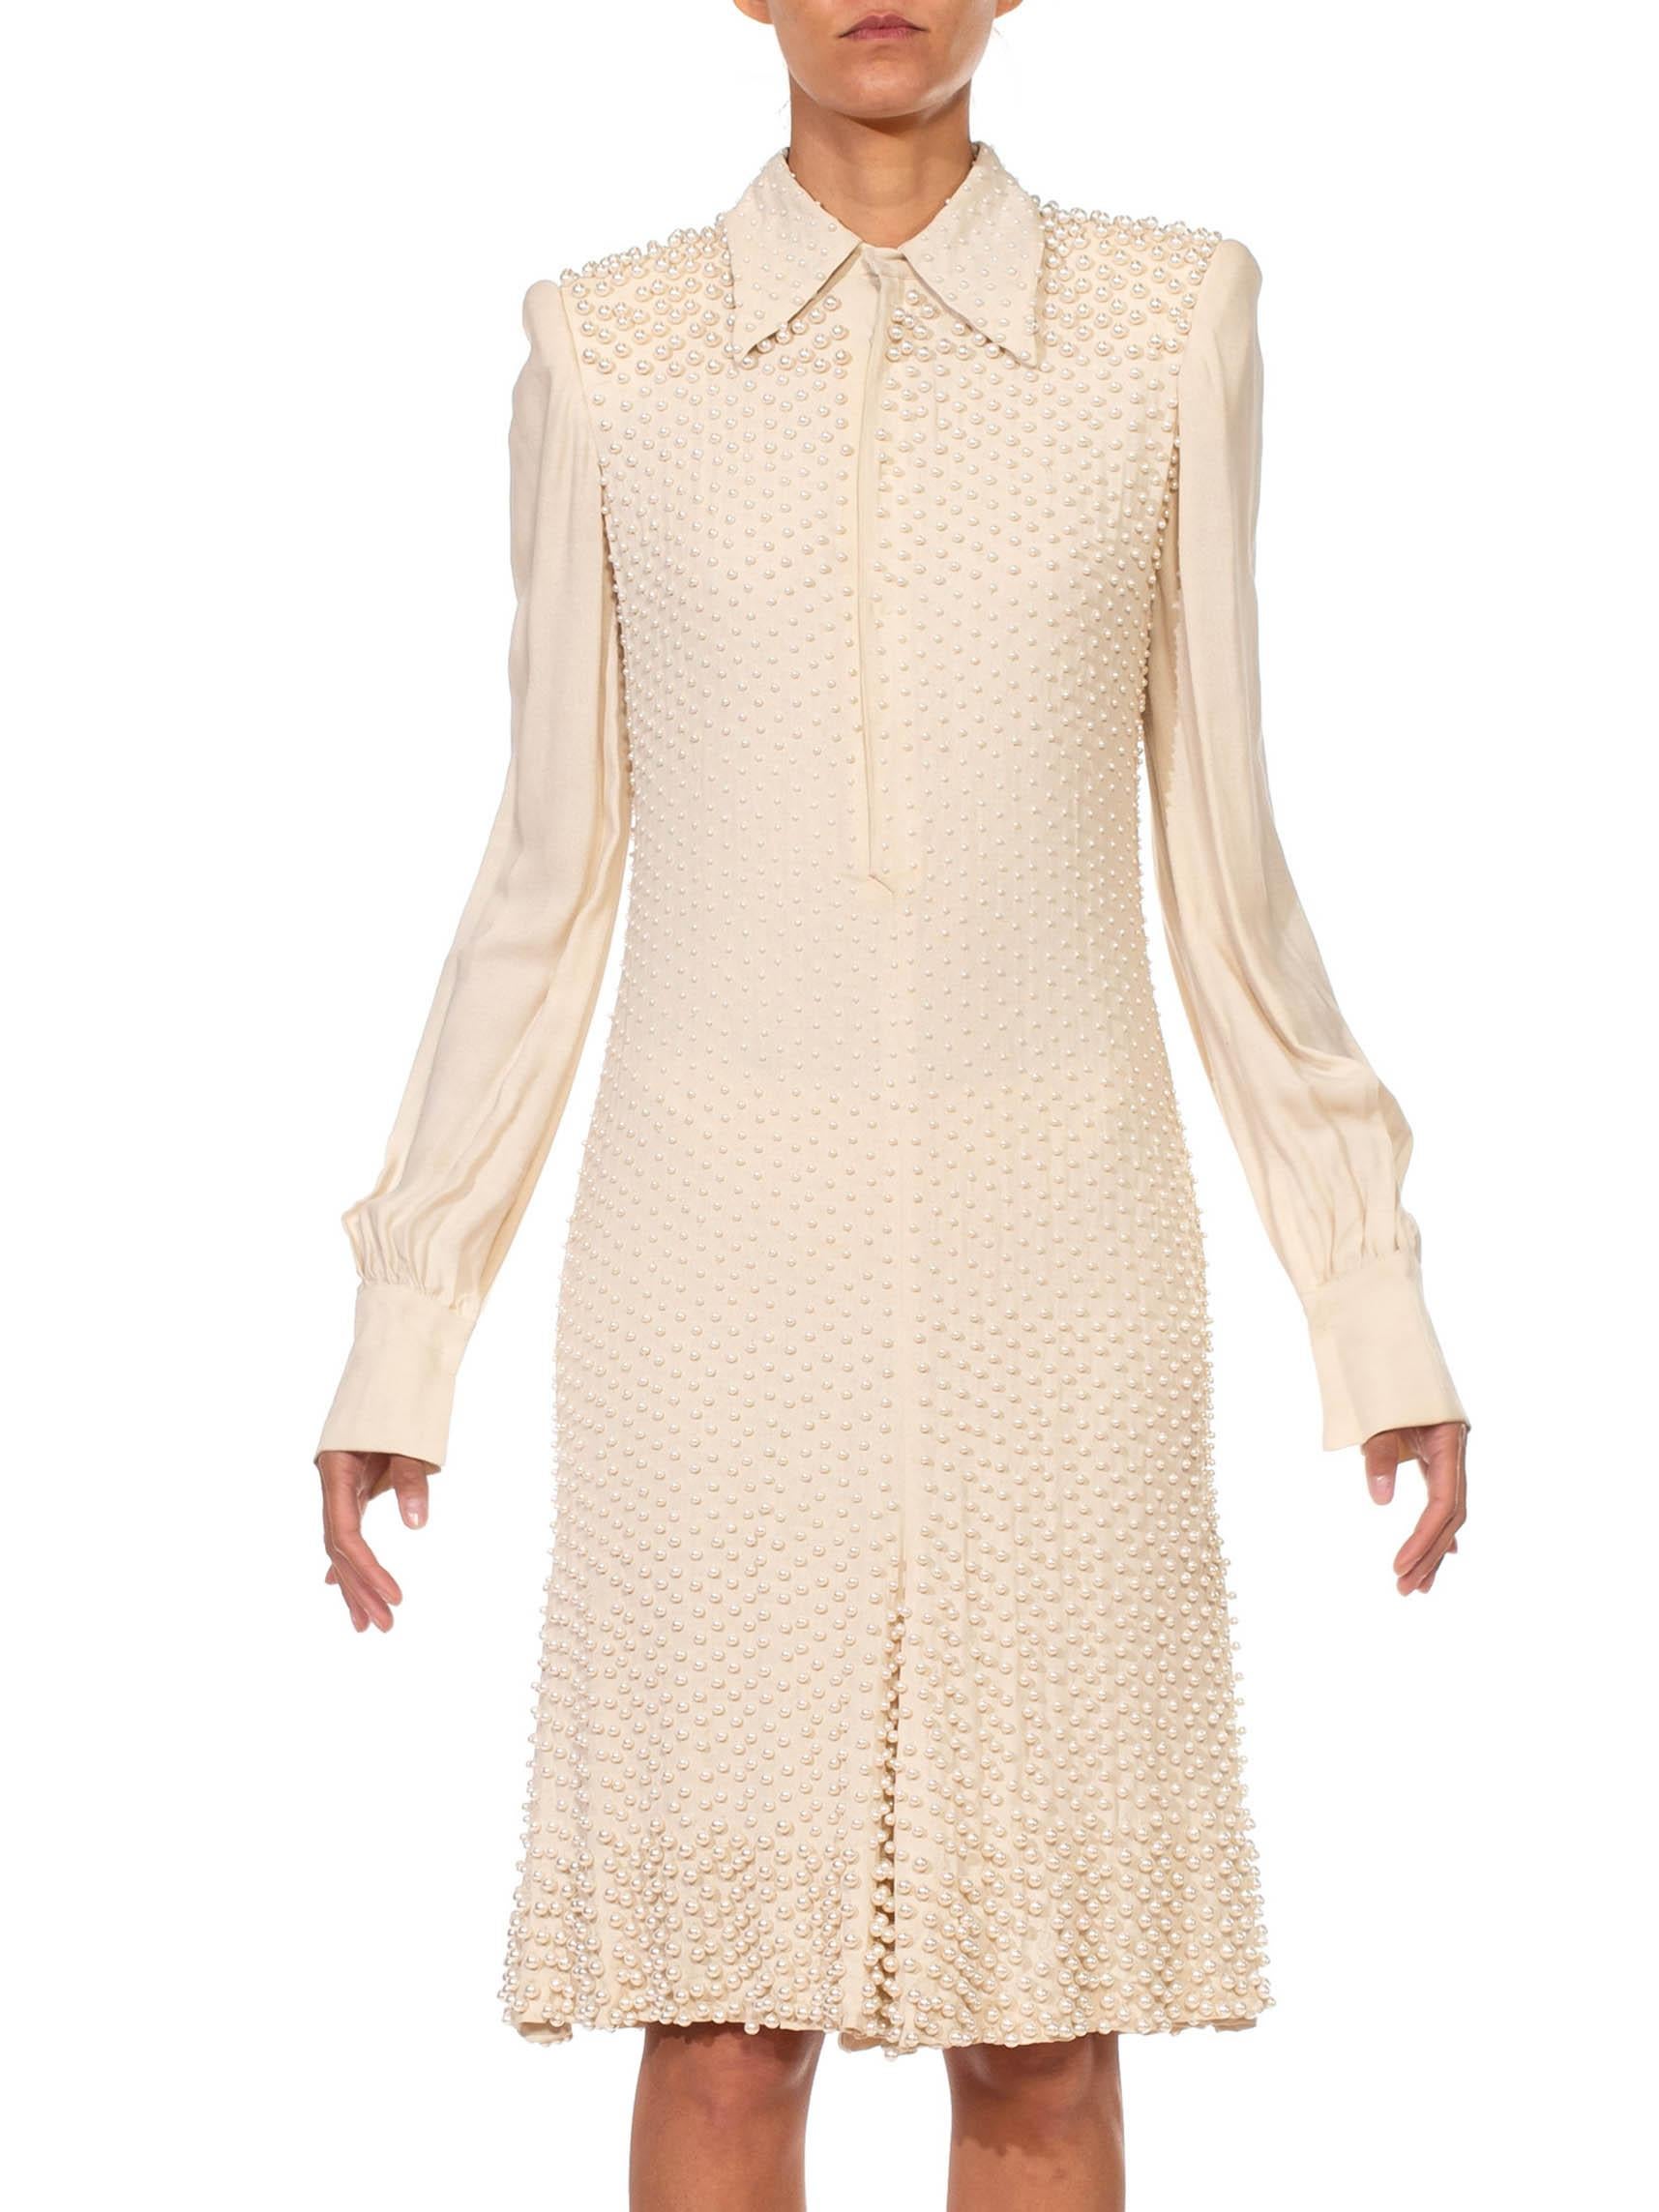 2000S JEAN PAUL GAULTIER Cream Silk Long Sleeved Cocktail Dress Covered In Pear For Sale 2